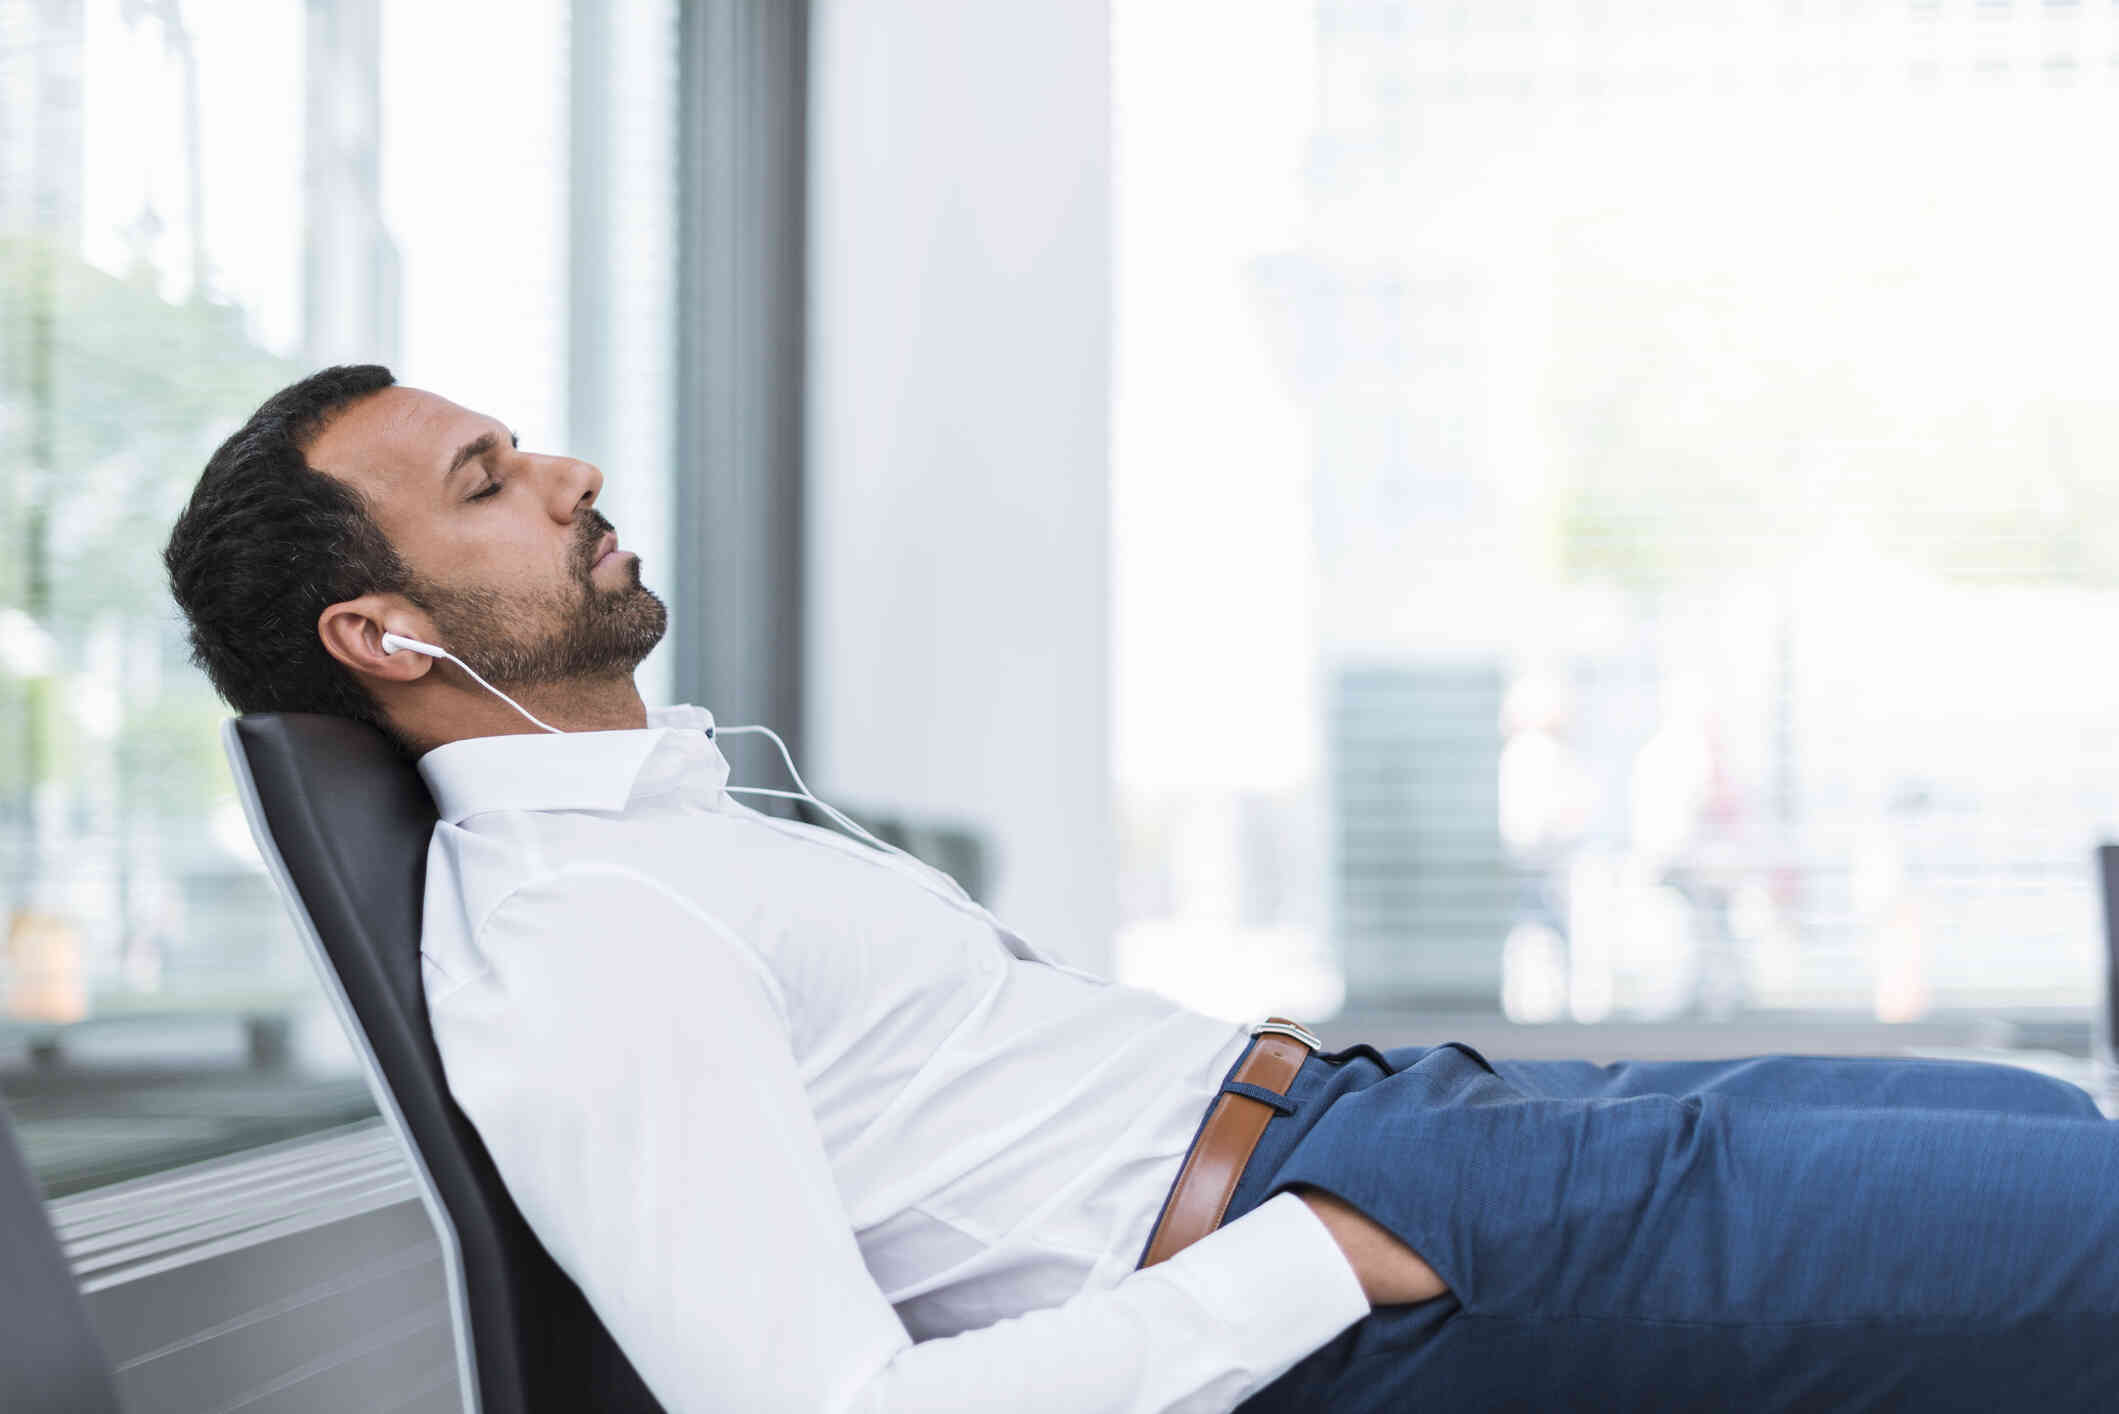 A man in a white button down shirt reclines in his office chair and closes his eyes while wearing headphones.